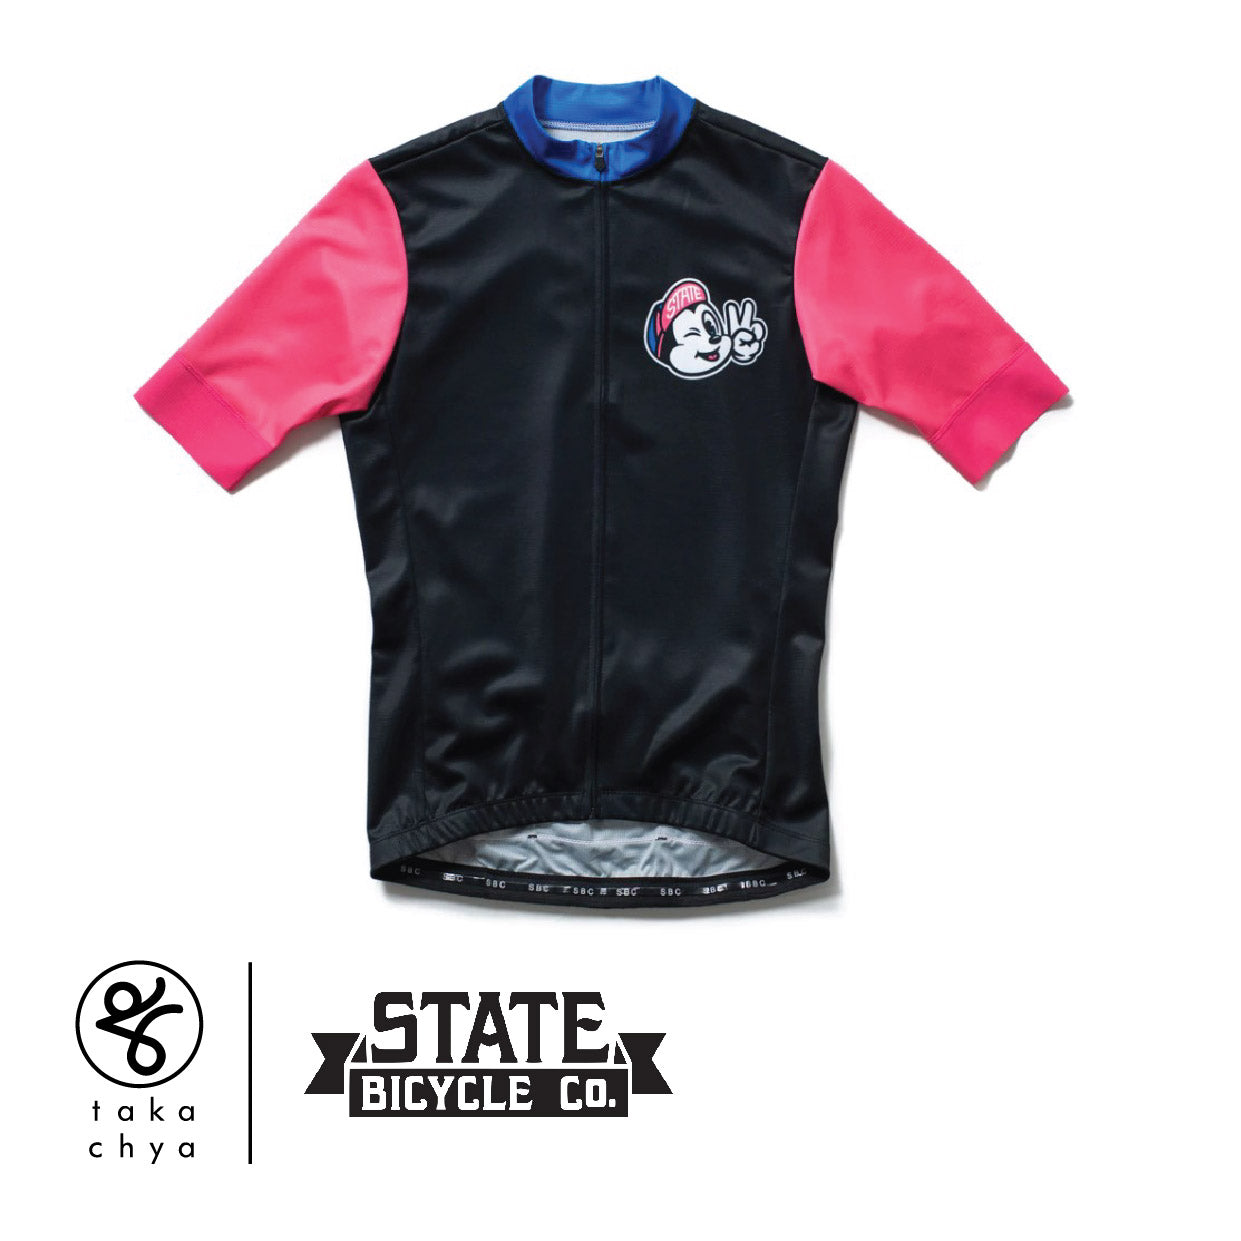 STATE BICYCLE CO. - RELAX.. JERSEY - SUSTAINABLE CLOTHING COLLECTION –